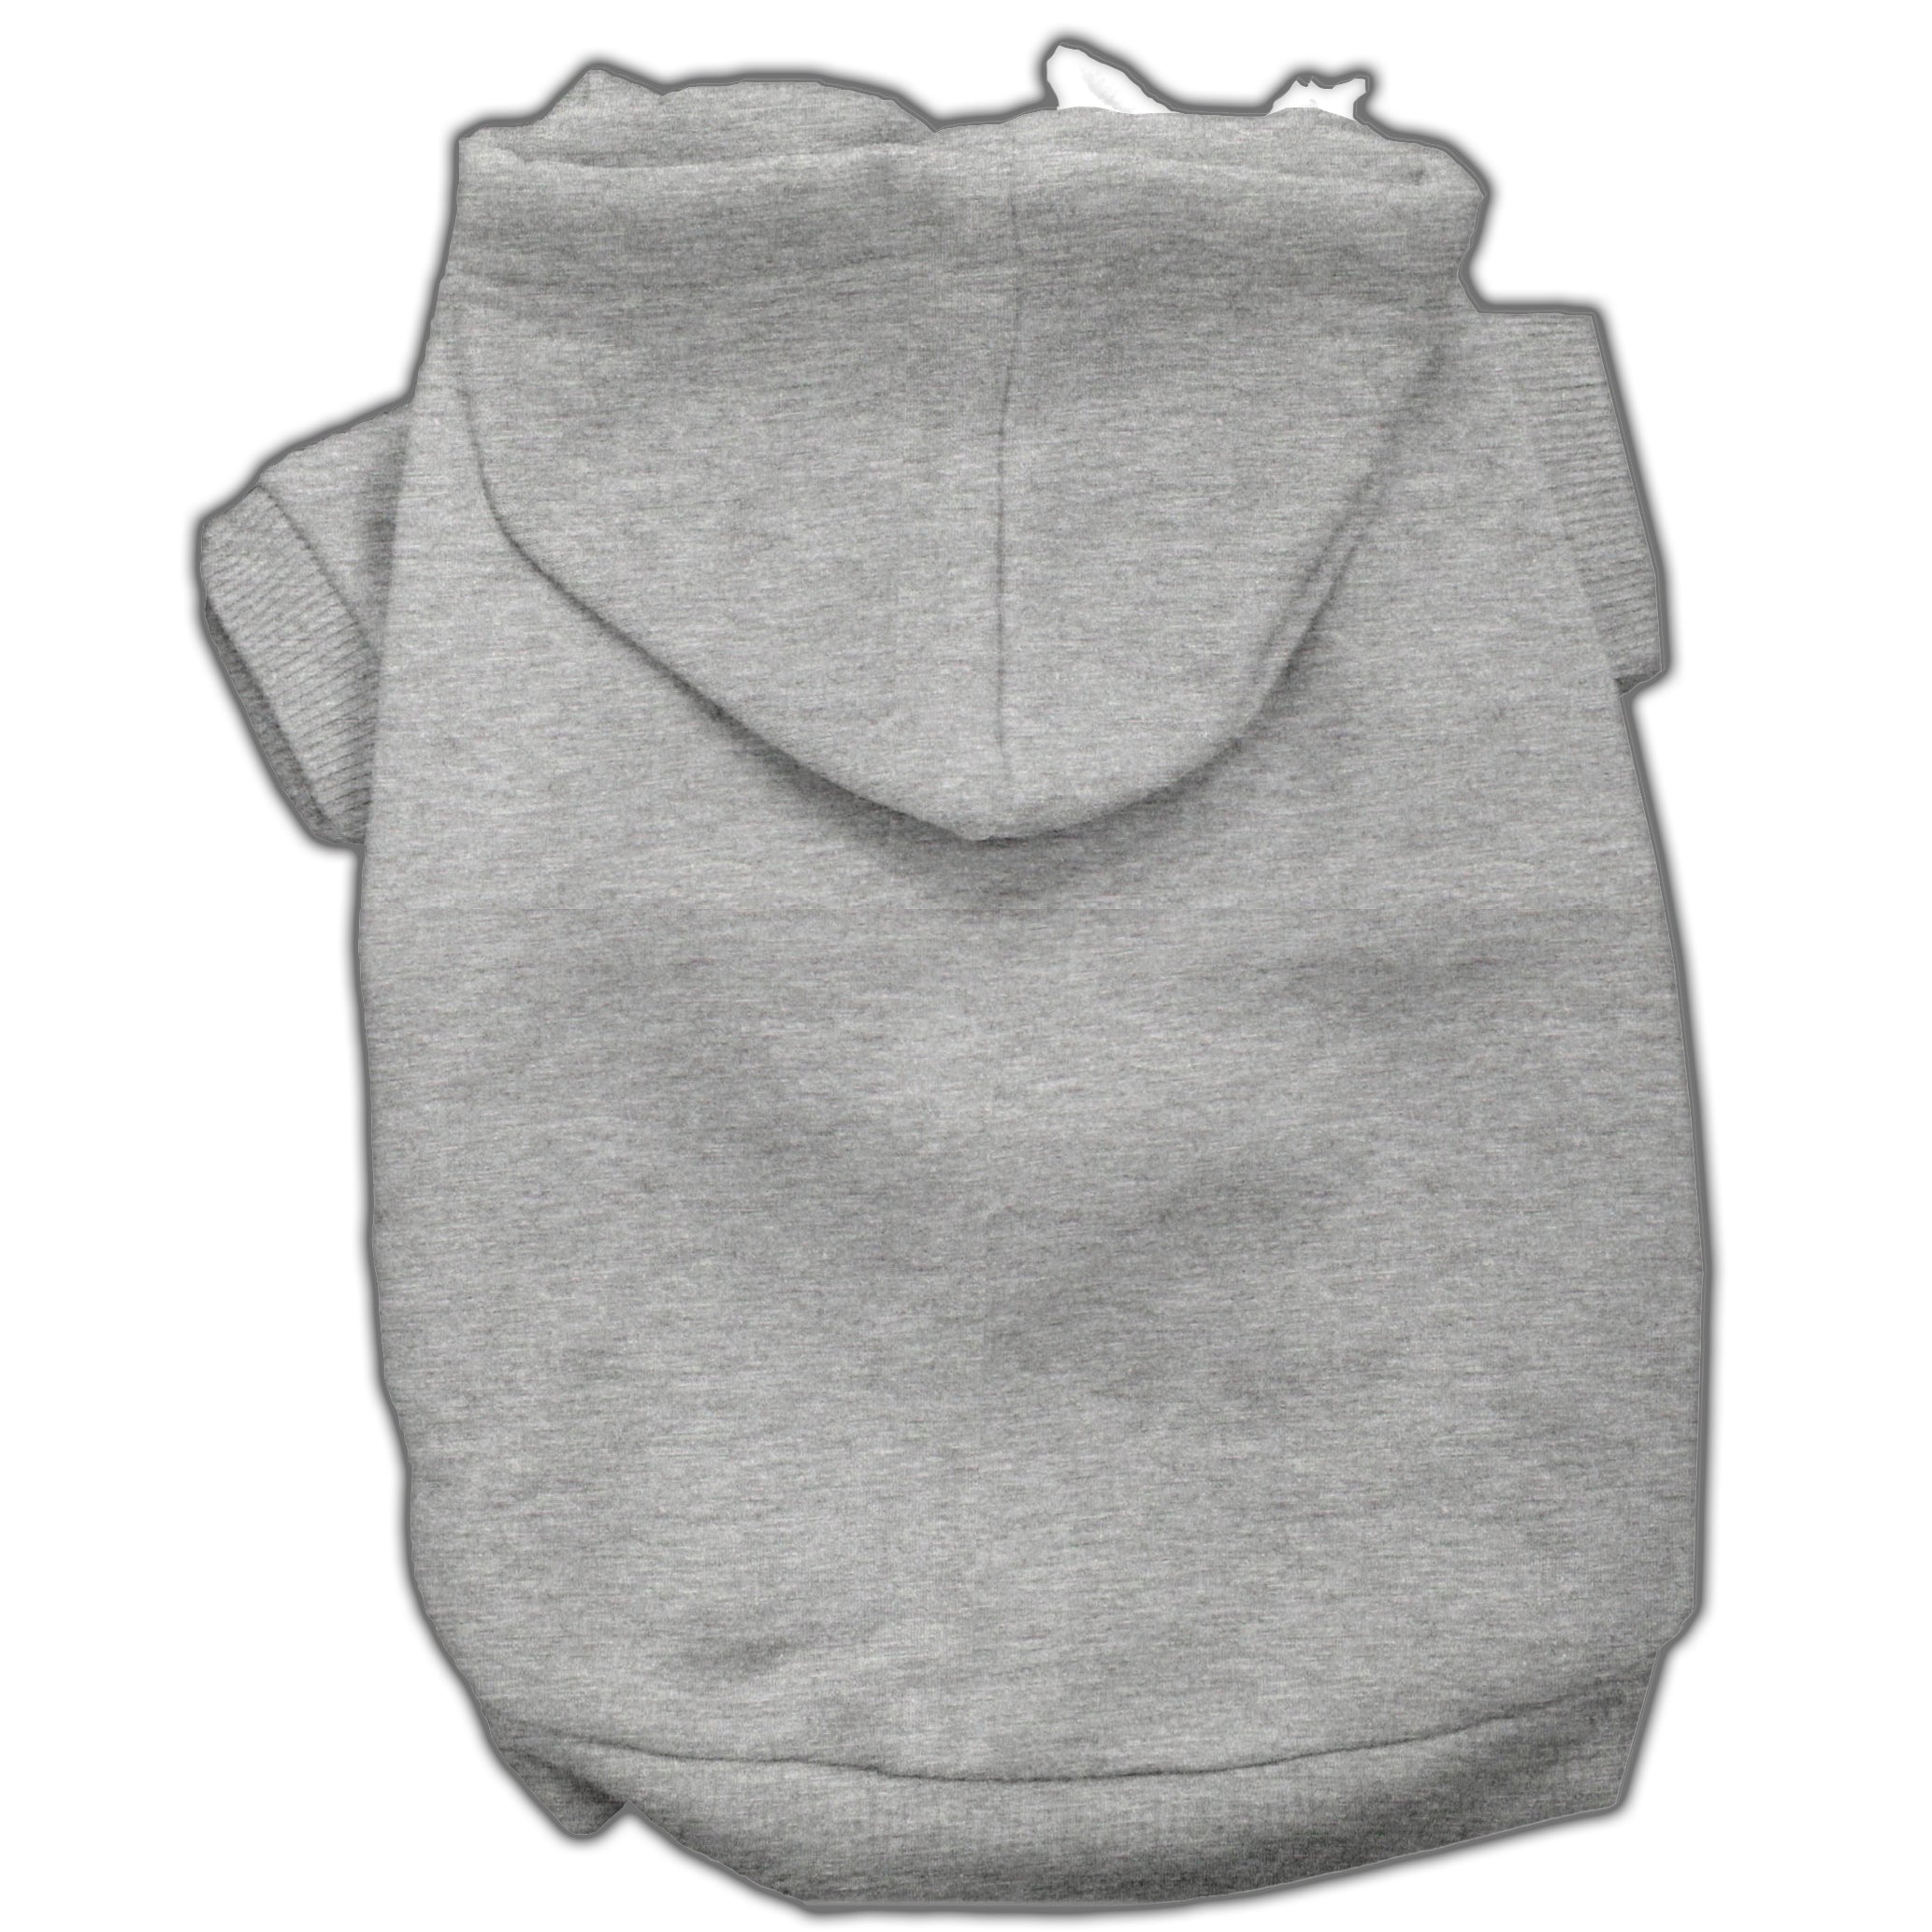 Plain Hoodies for Cats and Dogs